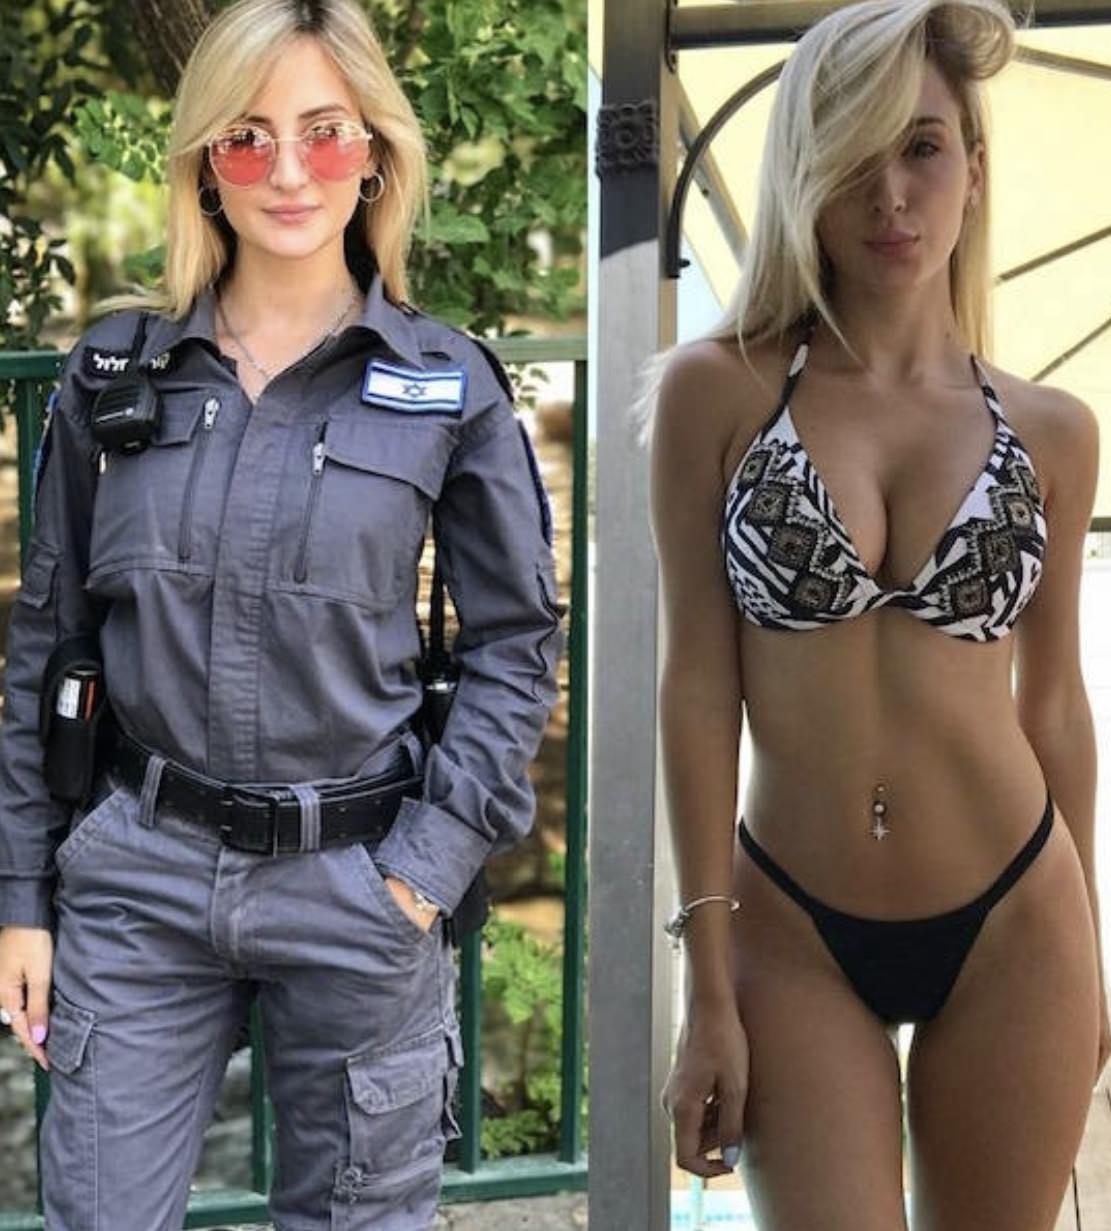 Hot Israeli soldier wearing rose-colored glasses and another picture of her wearing a tiny bathing suit